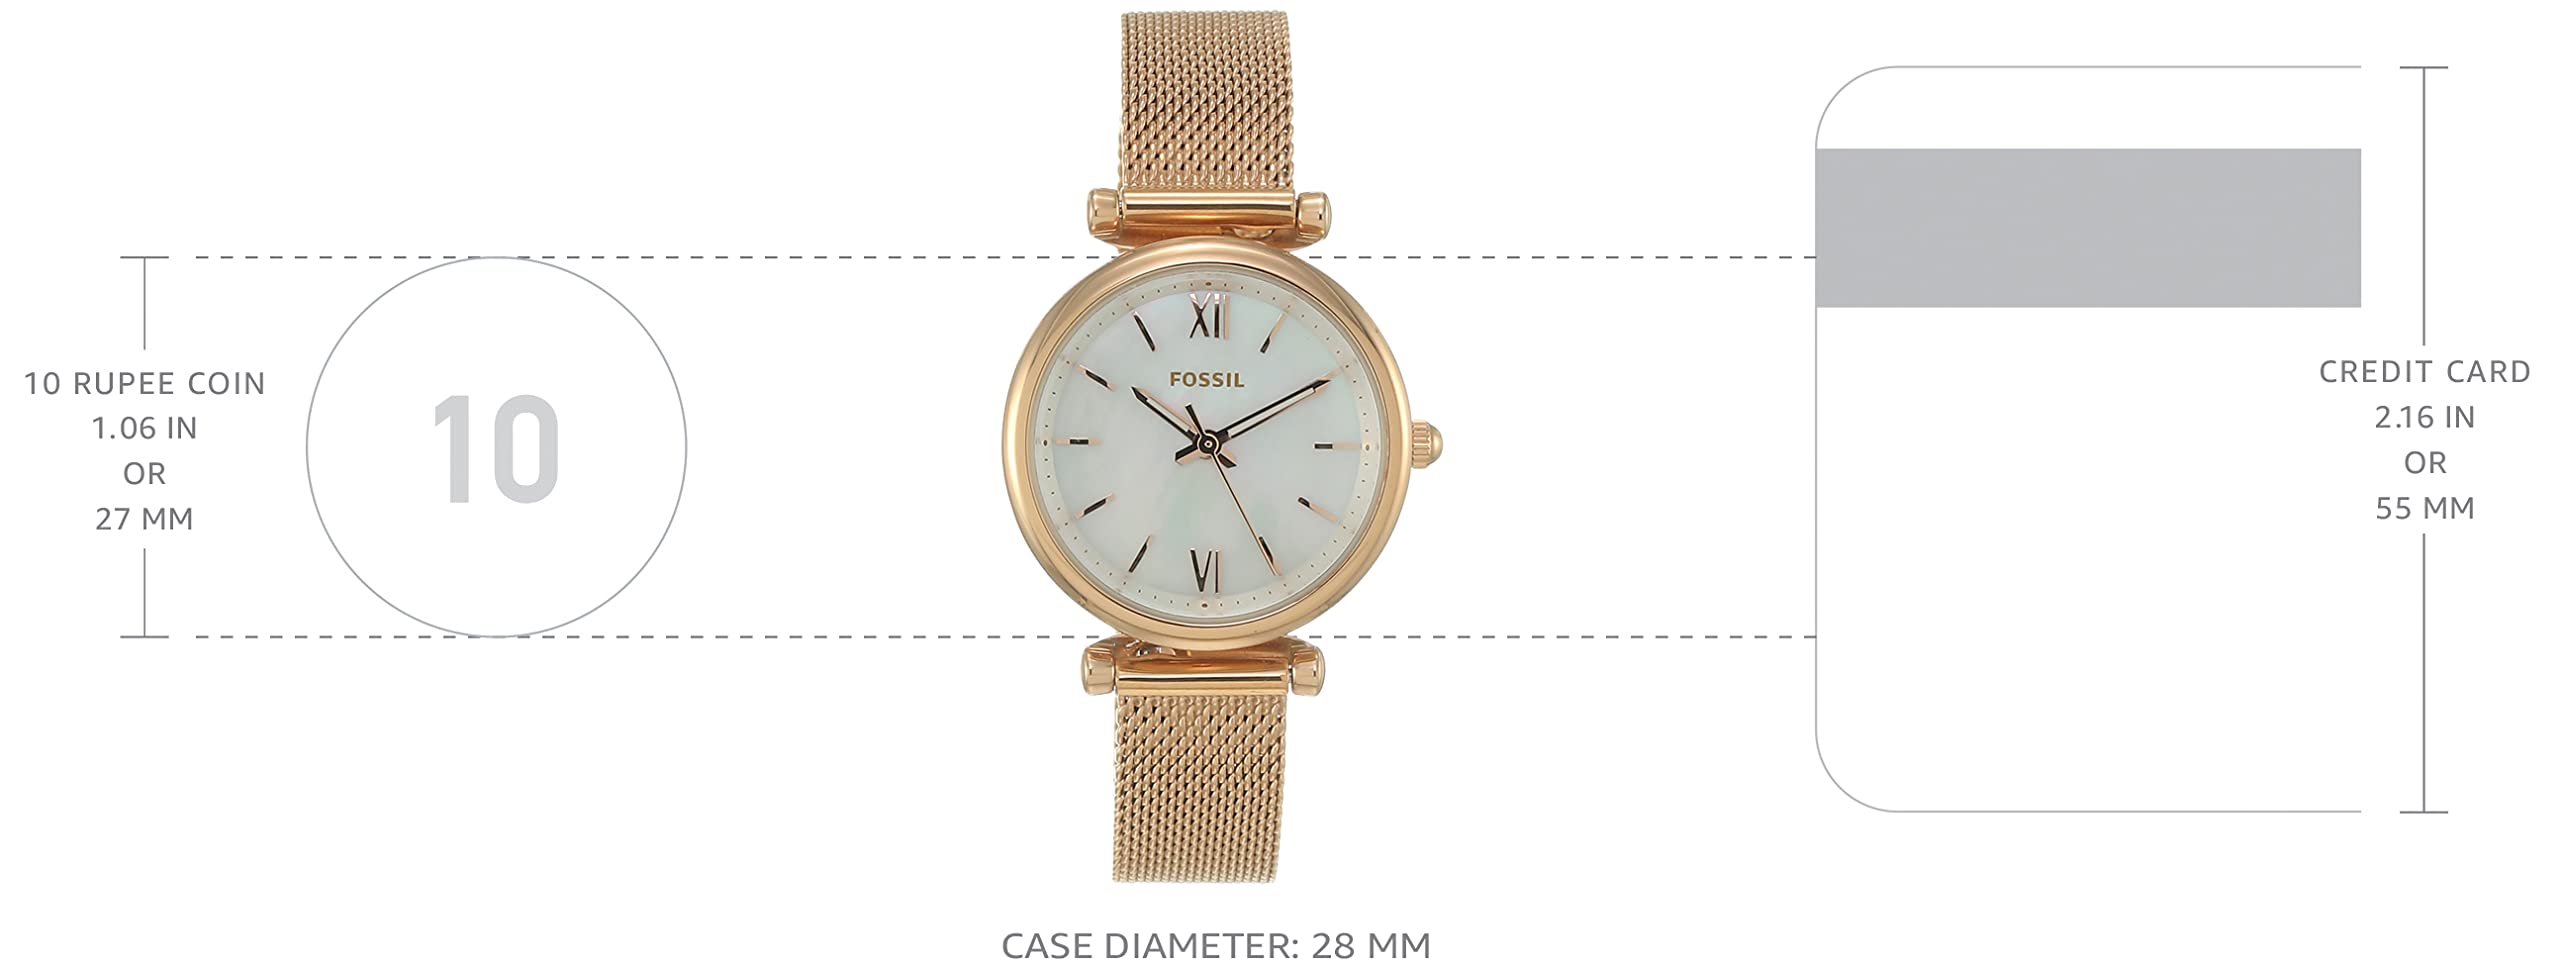 Fossil Carlie Mini Women's Watch with Stainless Steel or Leather Band